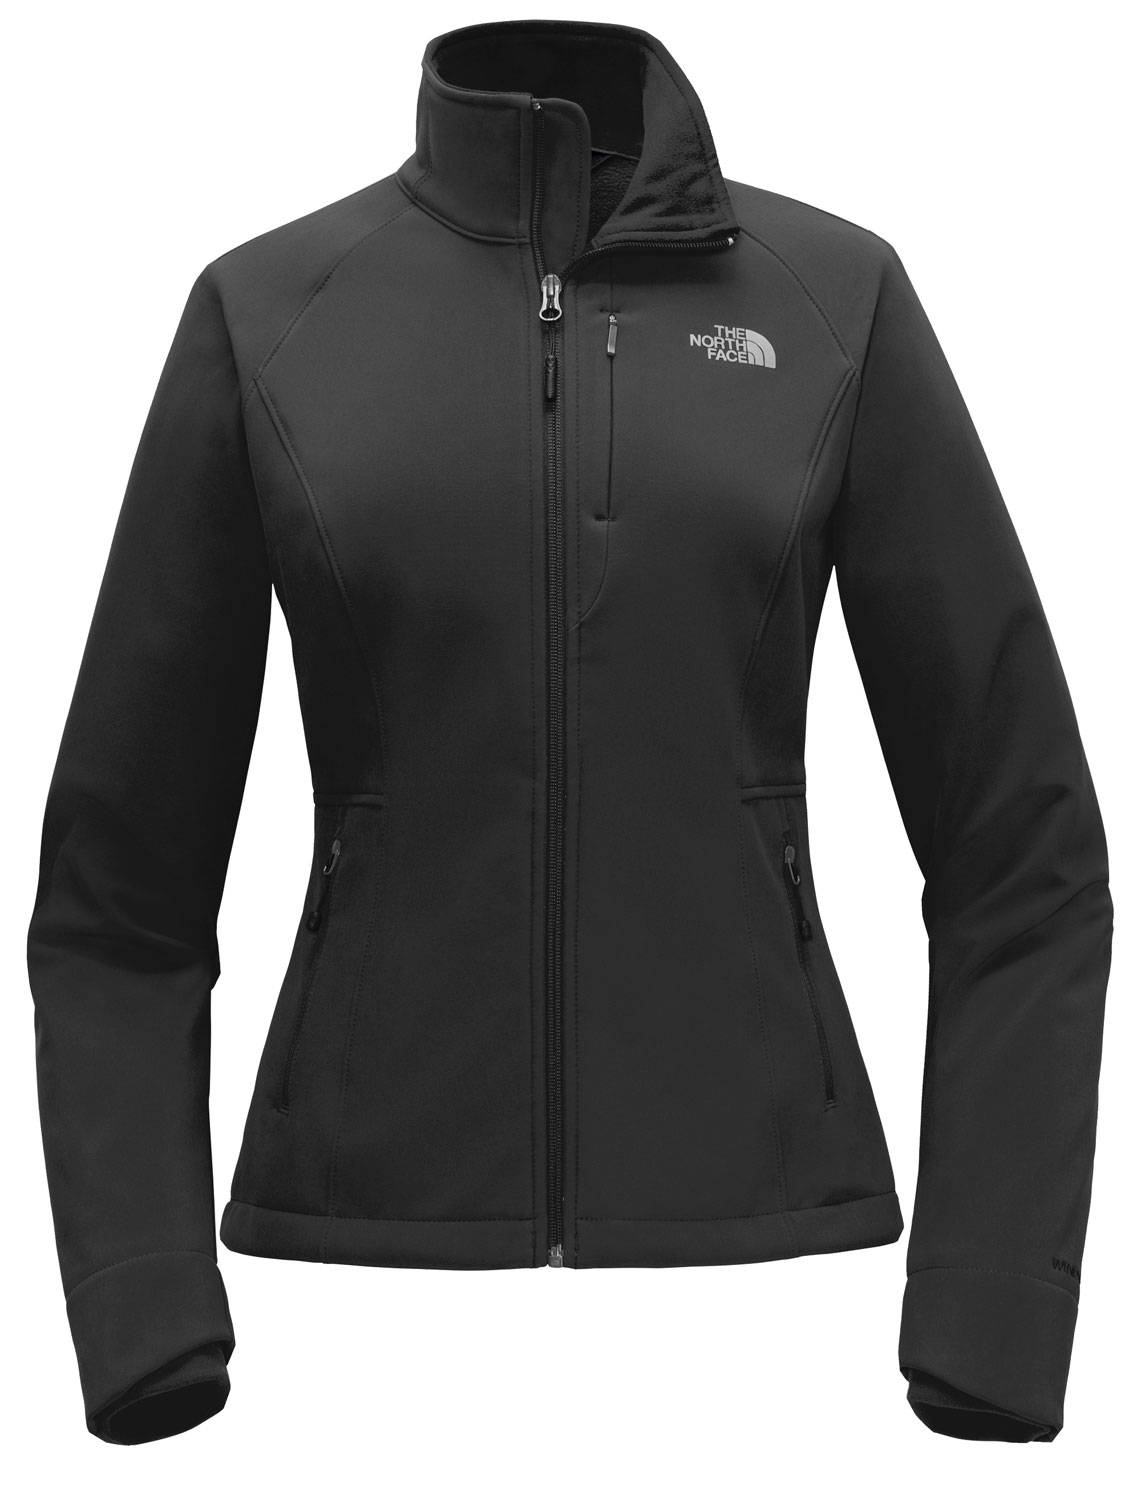 The North Face Apex Barrier Women's Custom Soft Shell Jacket